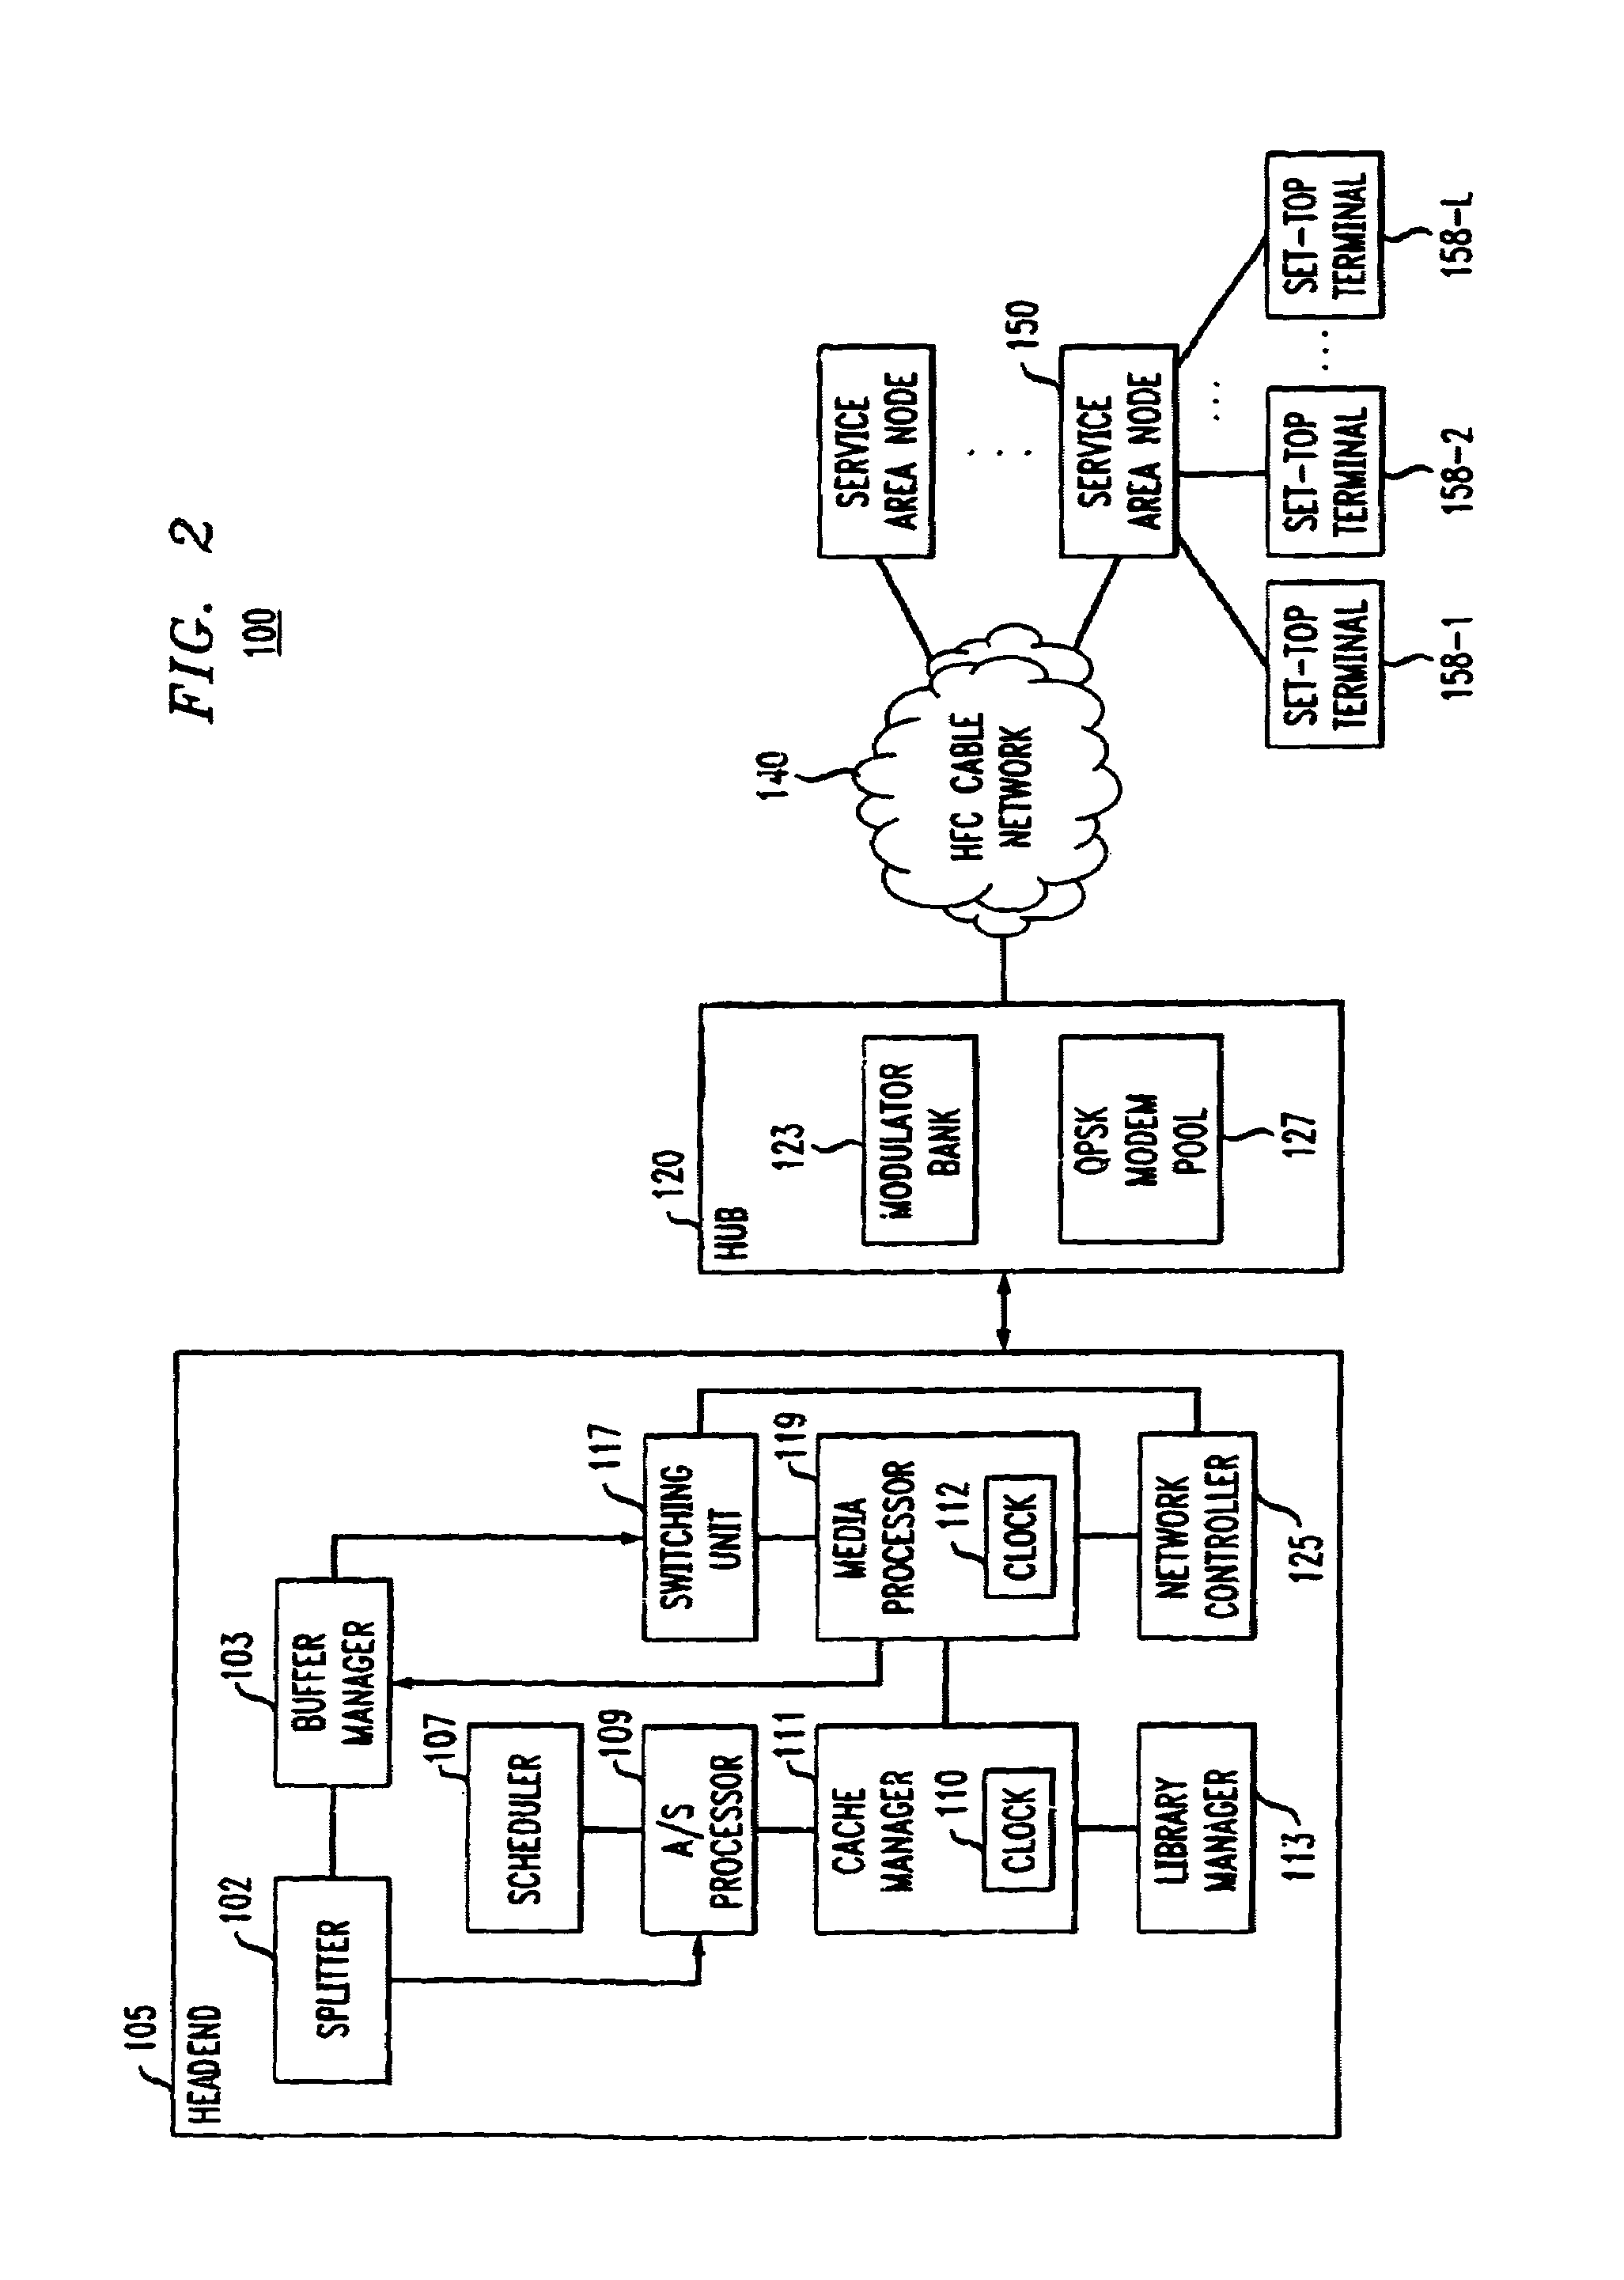 Technique for synchronizing deliveries of information and entertainment in a communications network